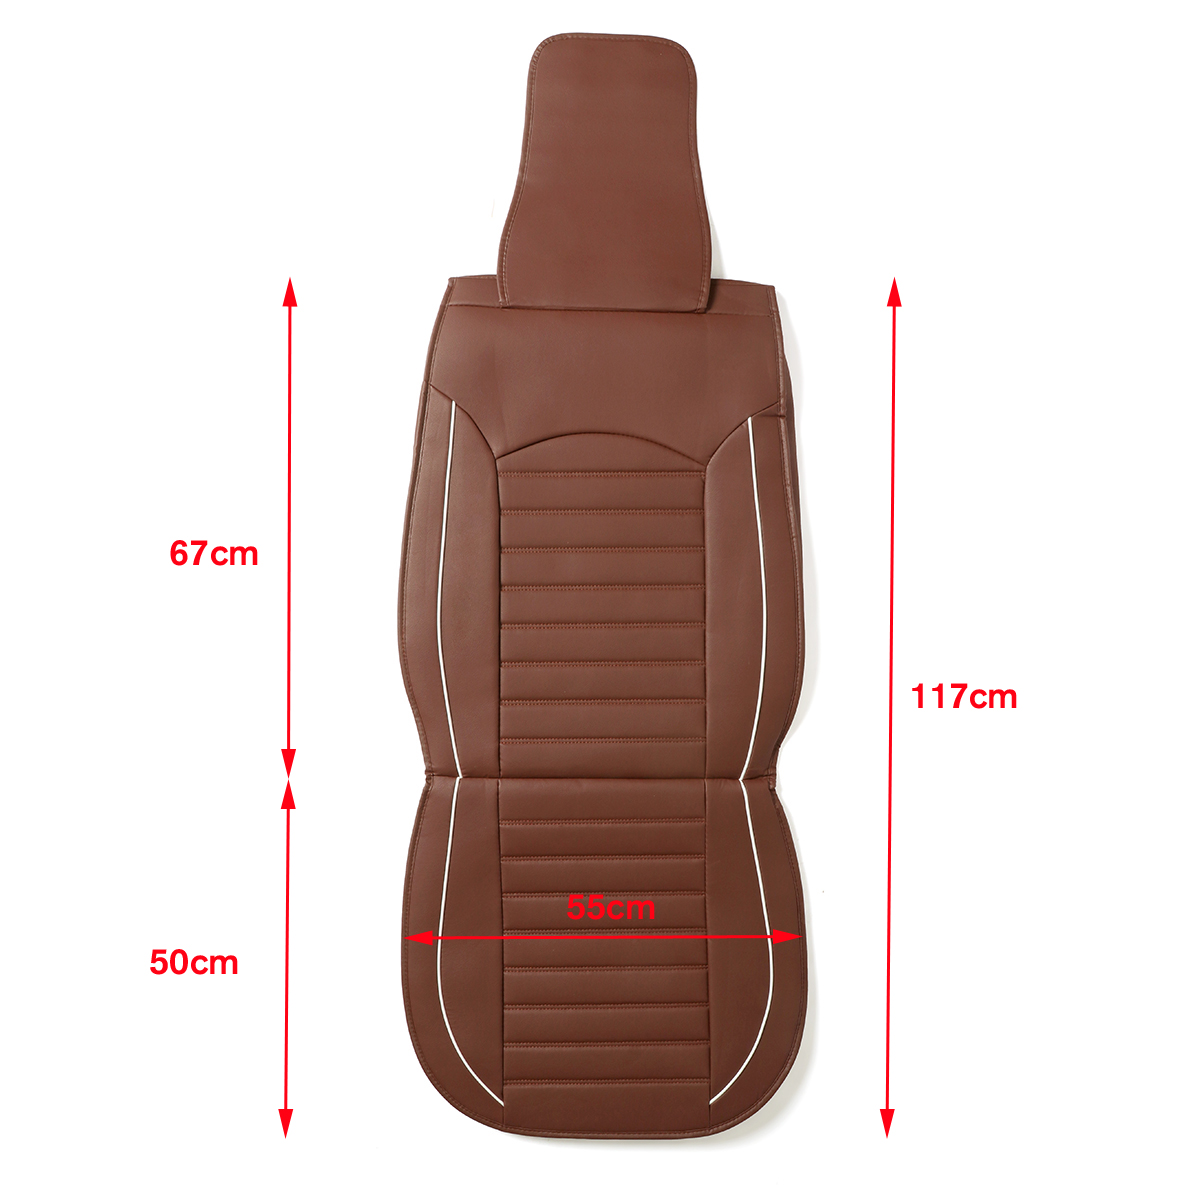 1X Universal PU Leather Car Seat Cover Waterproof Breathable Auto Seat Cushion